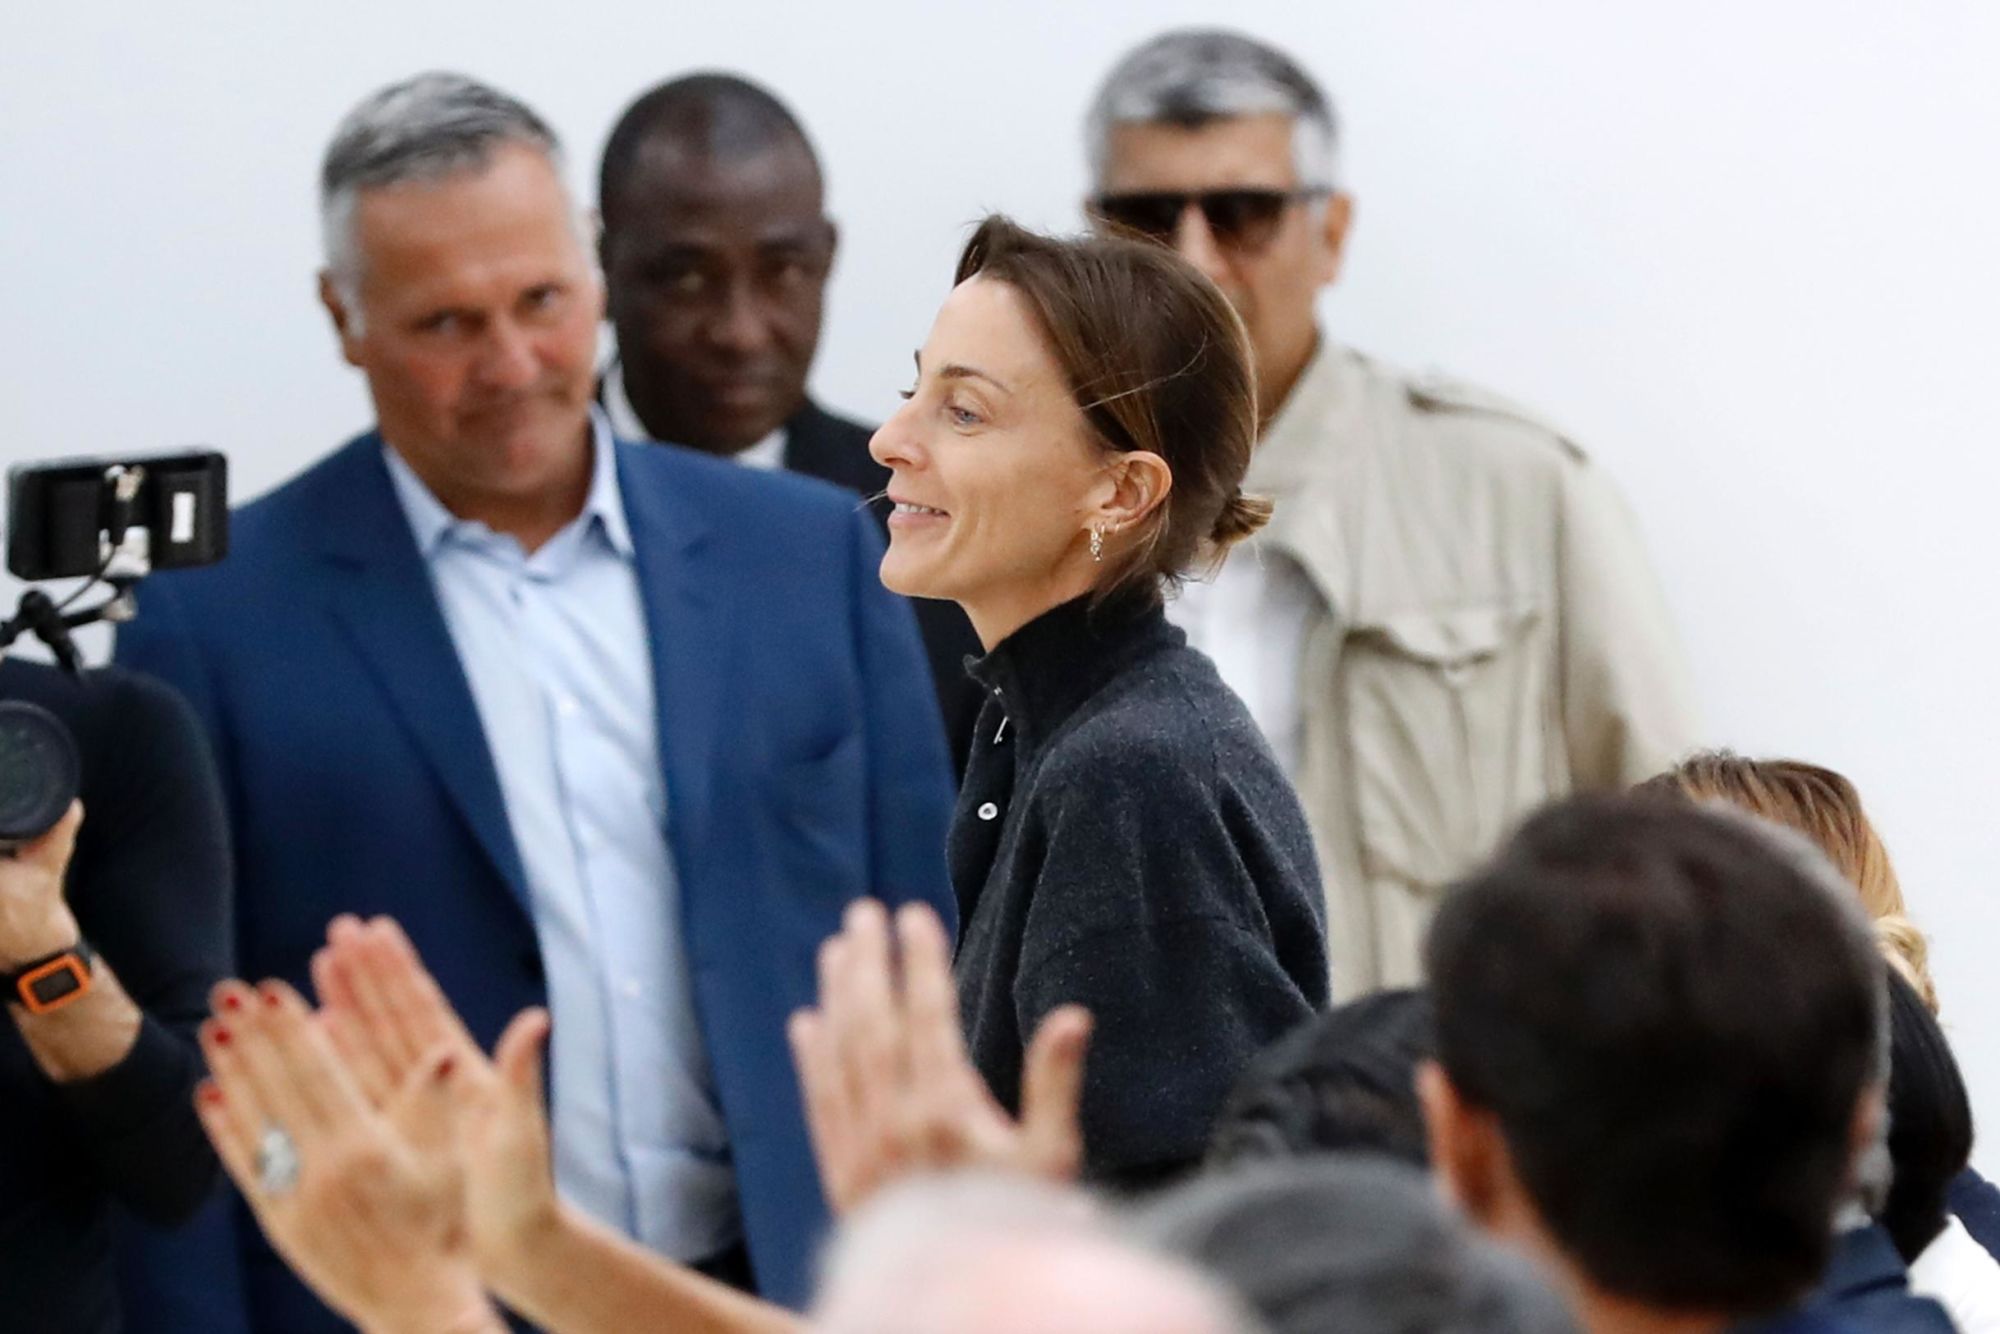 Phoebe Philo to Launch Eponymous Label, With LVMH Backing